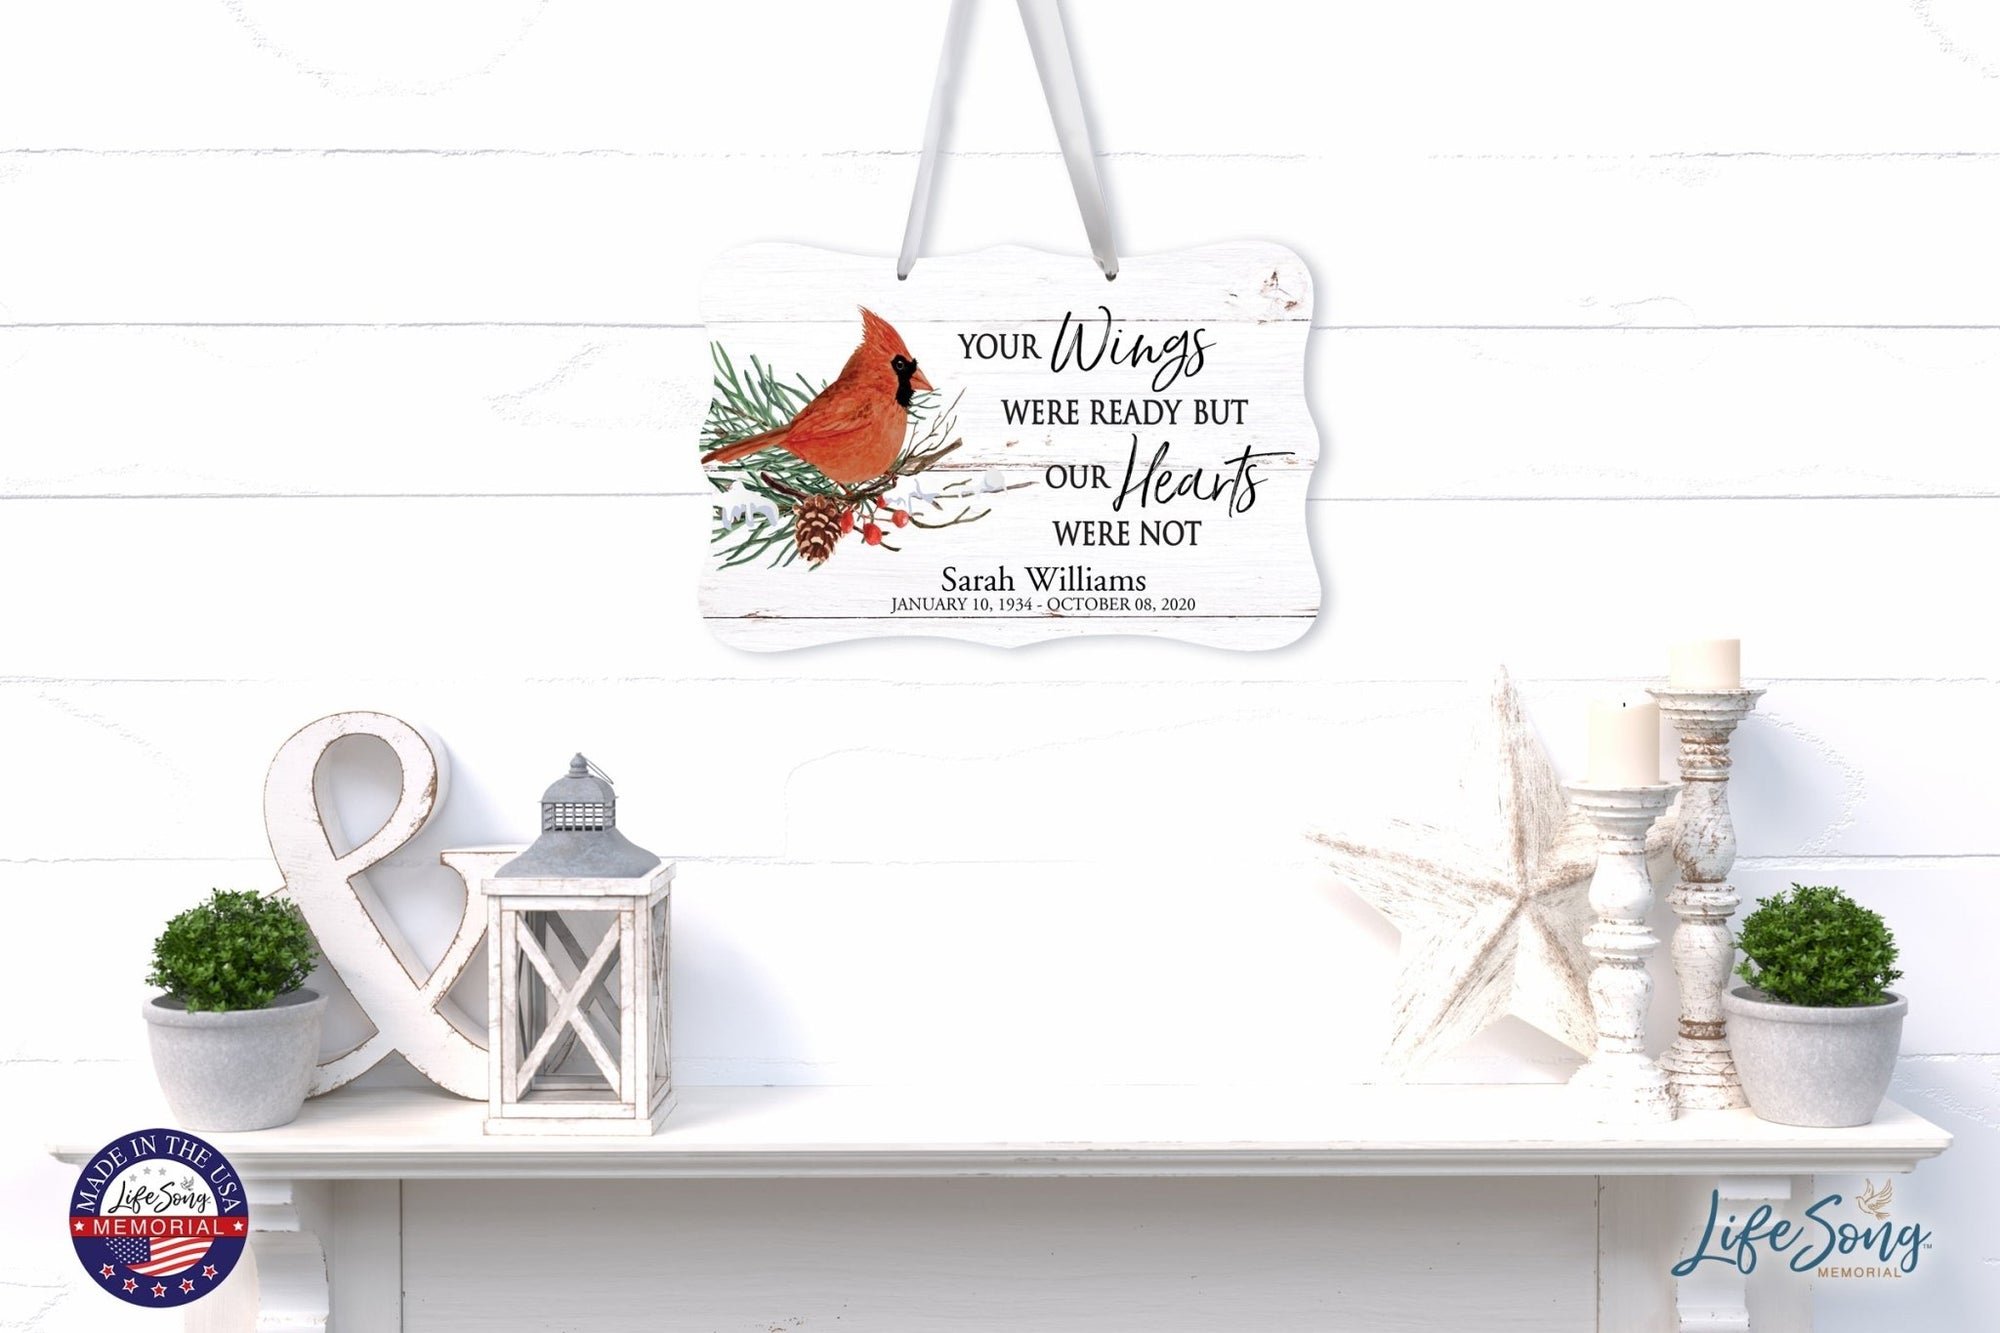 Personalized Cardinal Memorial Christmas Wall Sign 14in with Inspirational Verse Keepsake Gift Your Wings Were - LifeSong Milestones